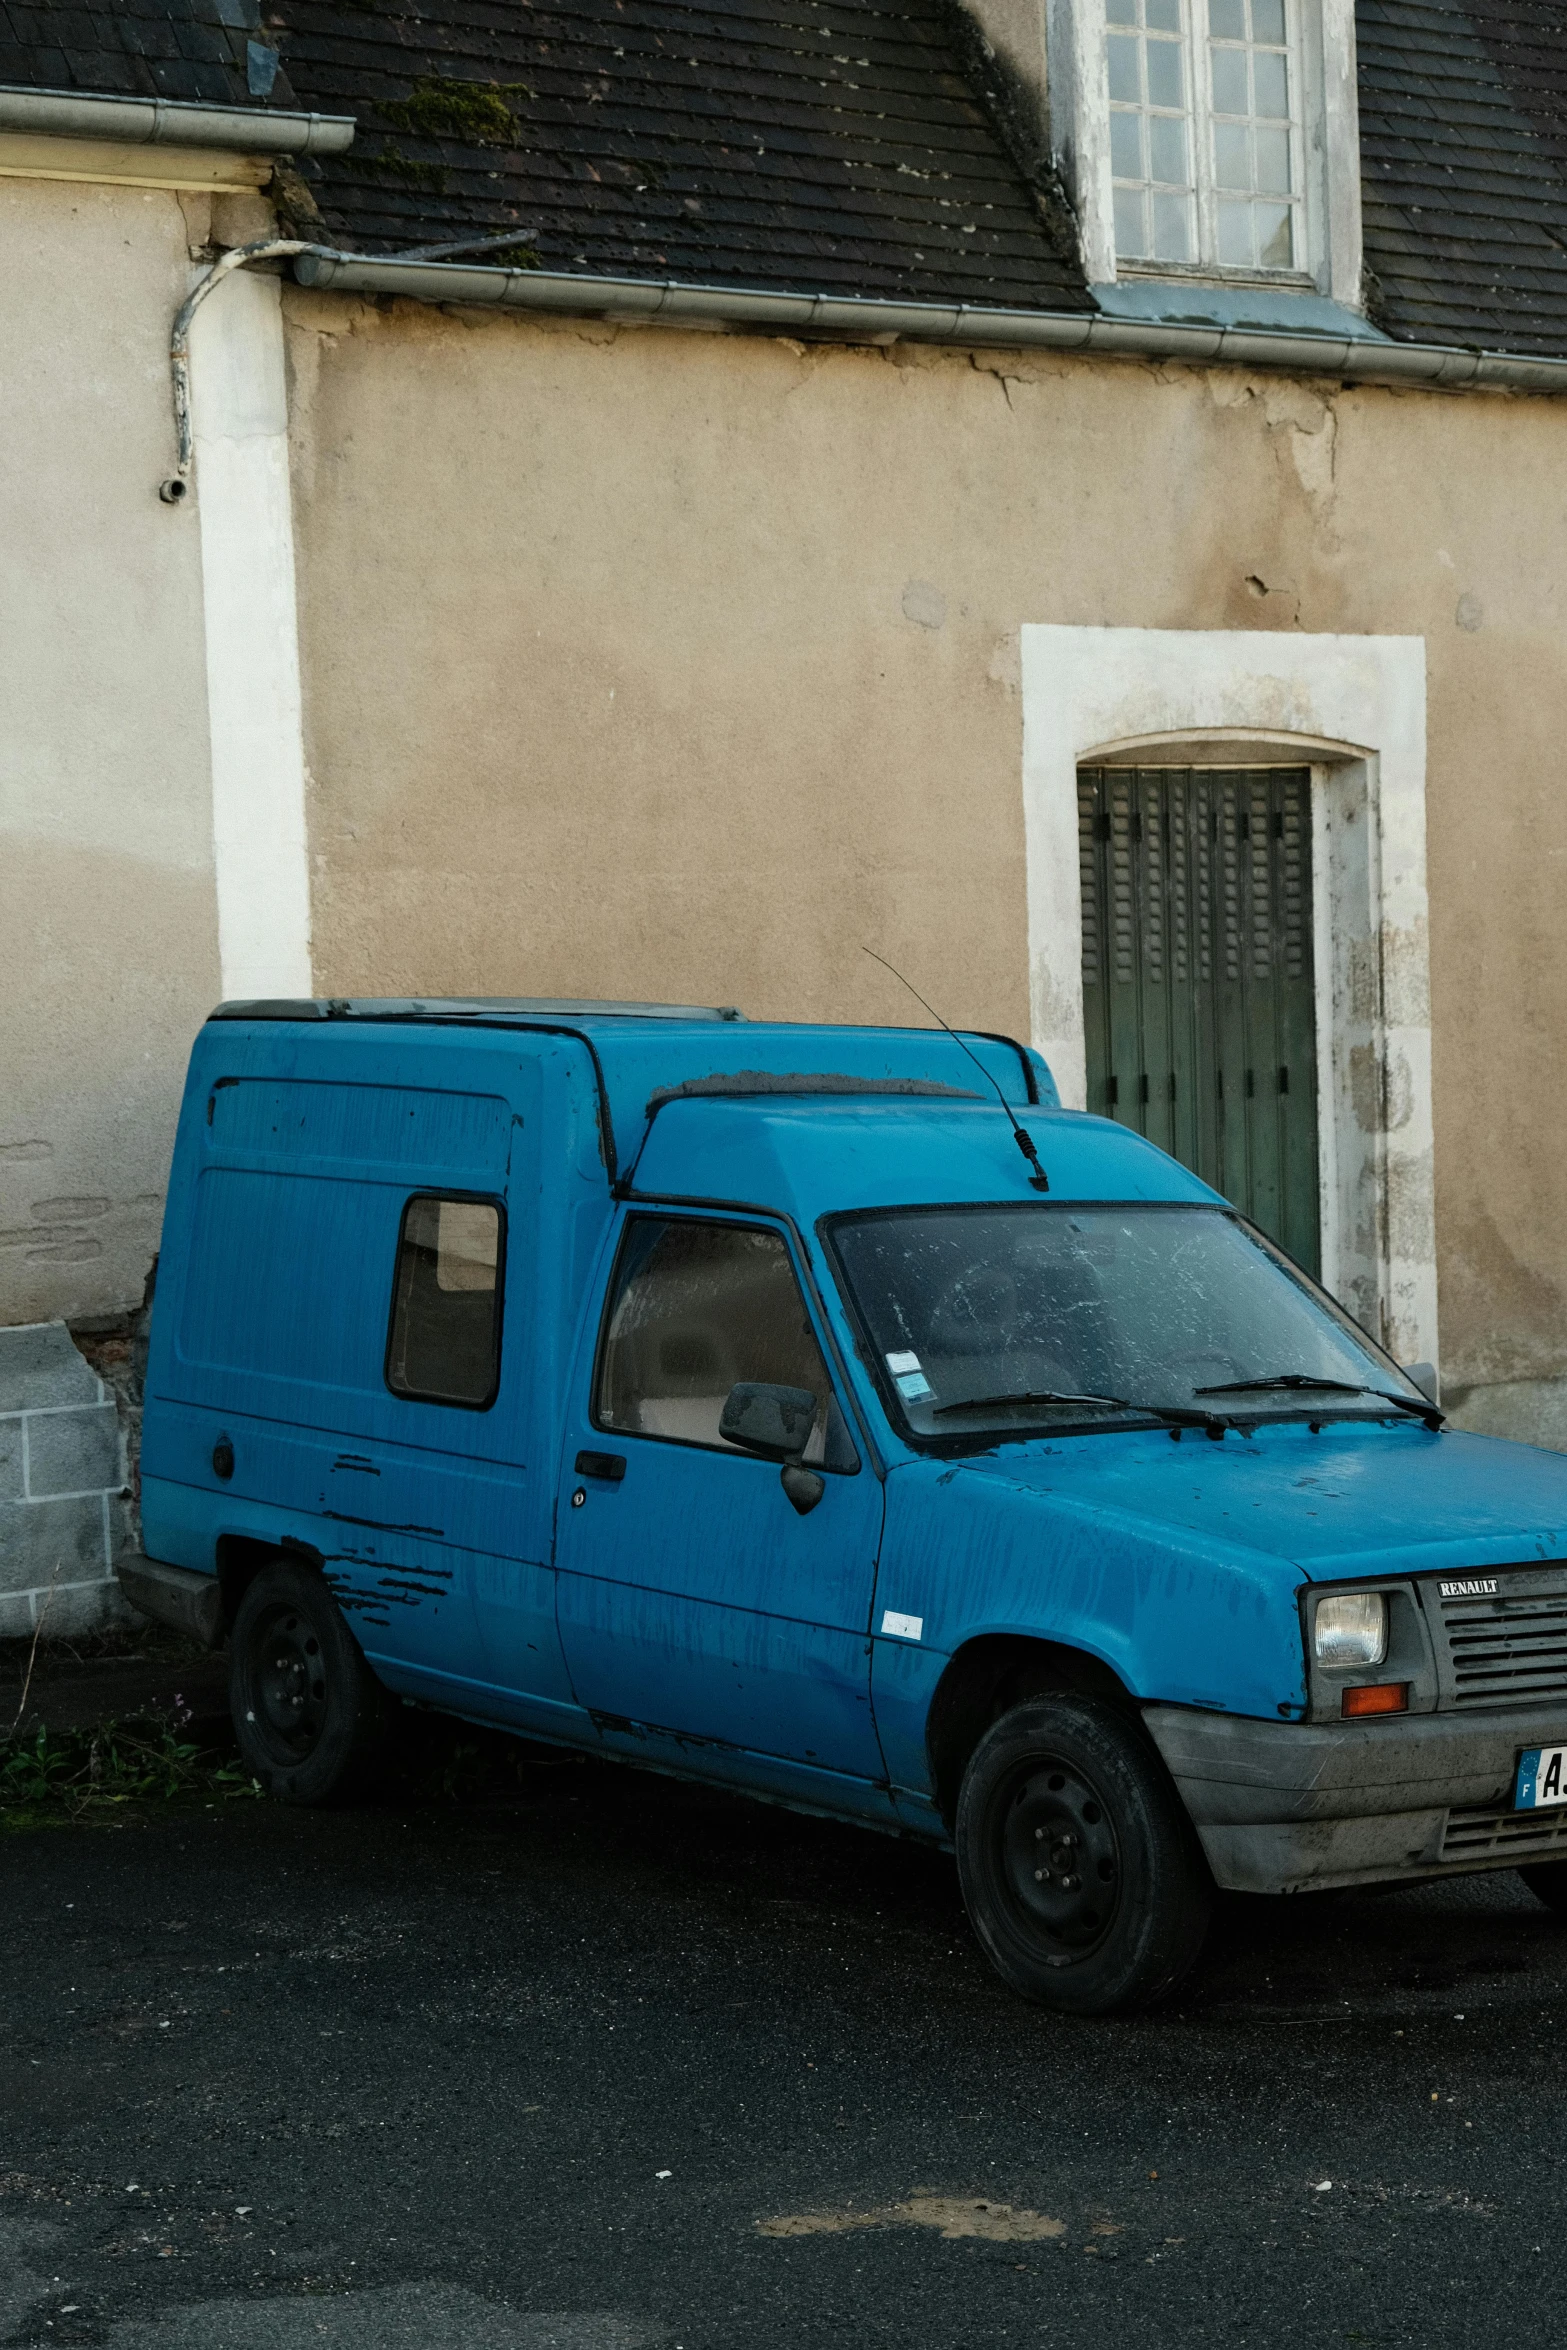 the van is painted blue and parked in the street